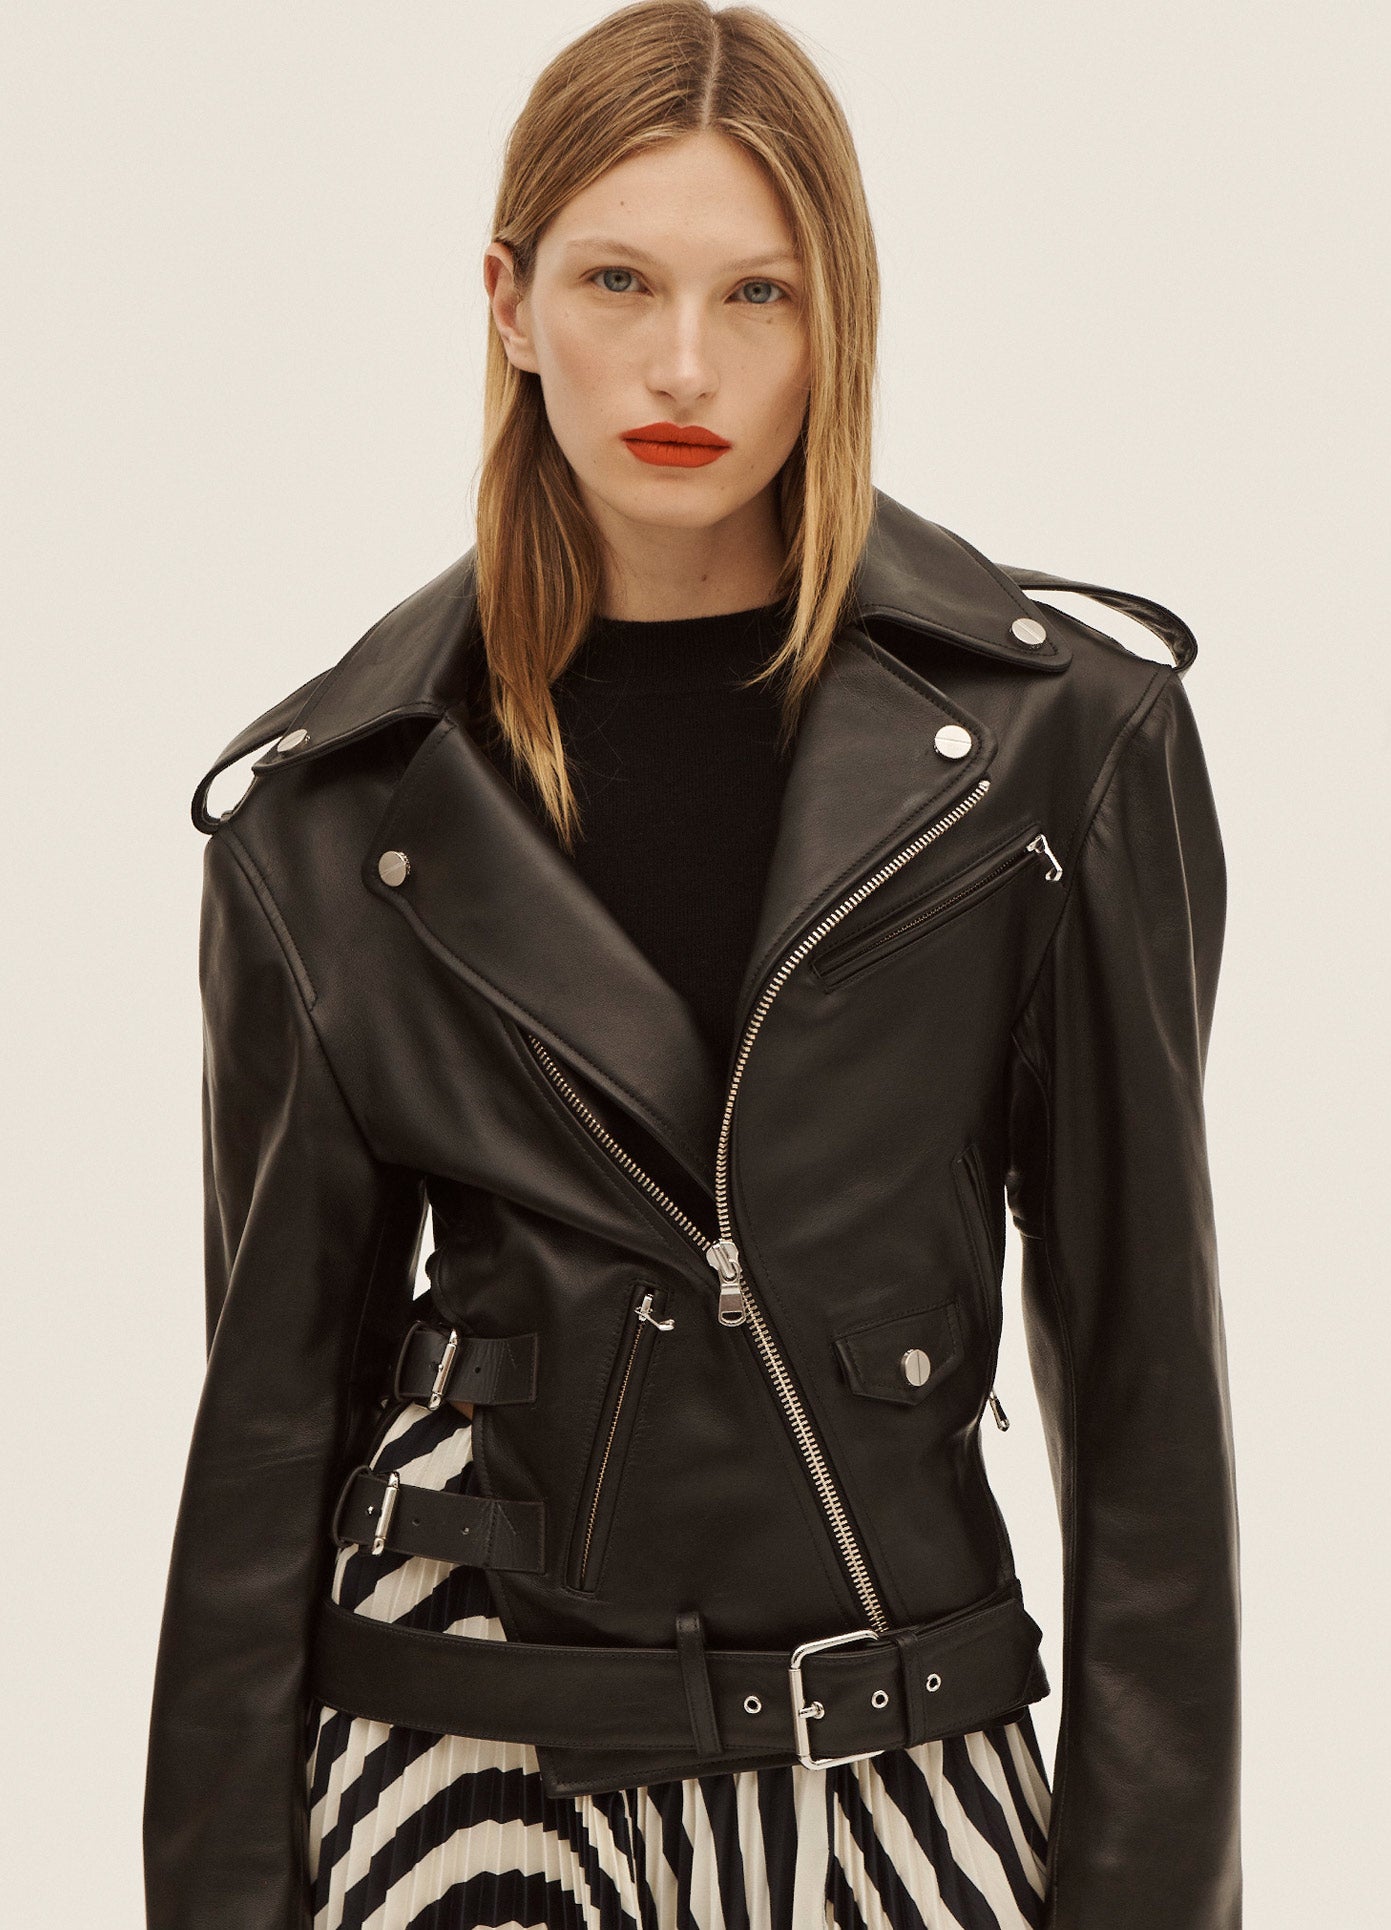 MONSE Belted Leather Jacket in Black on Model Front Detail View